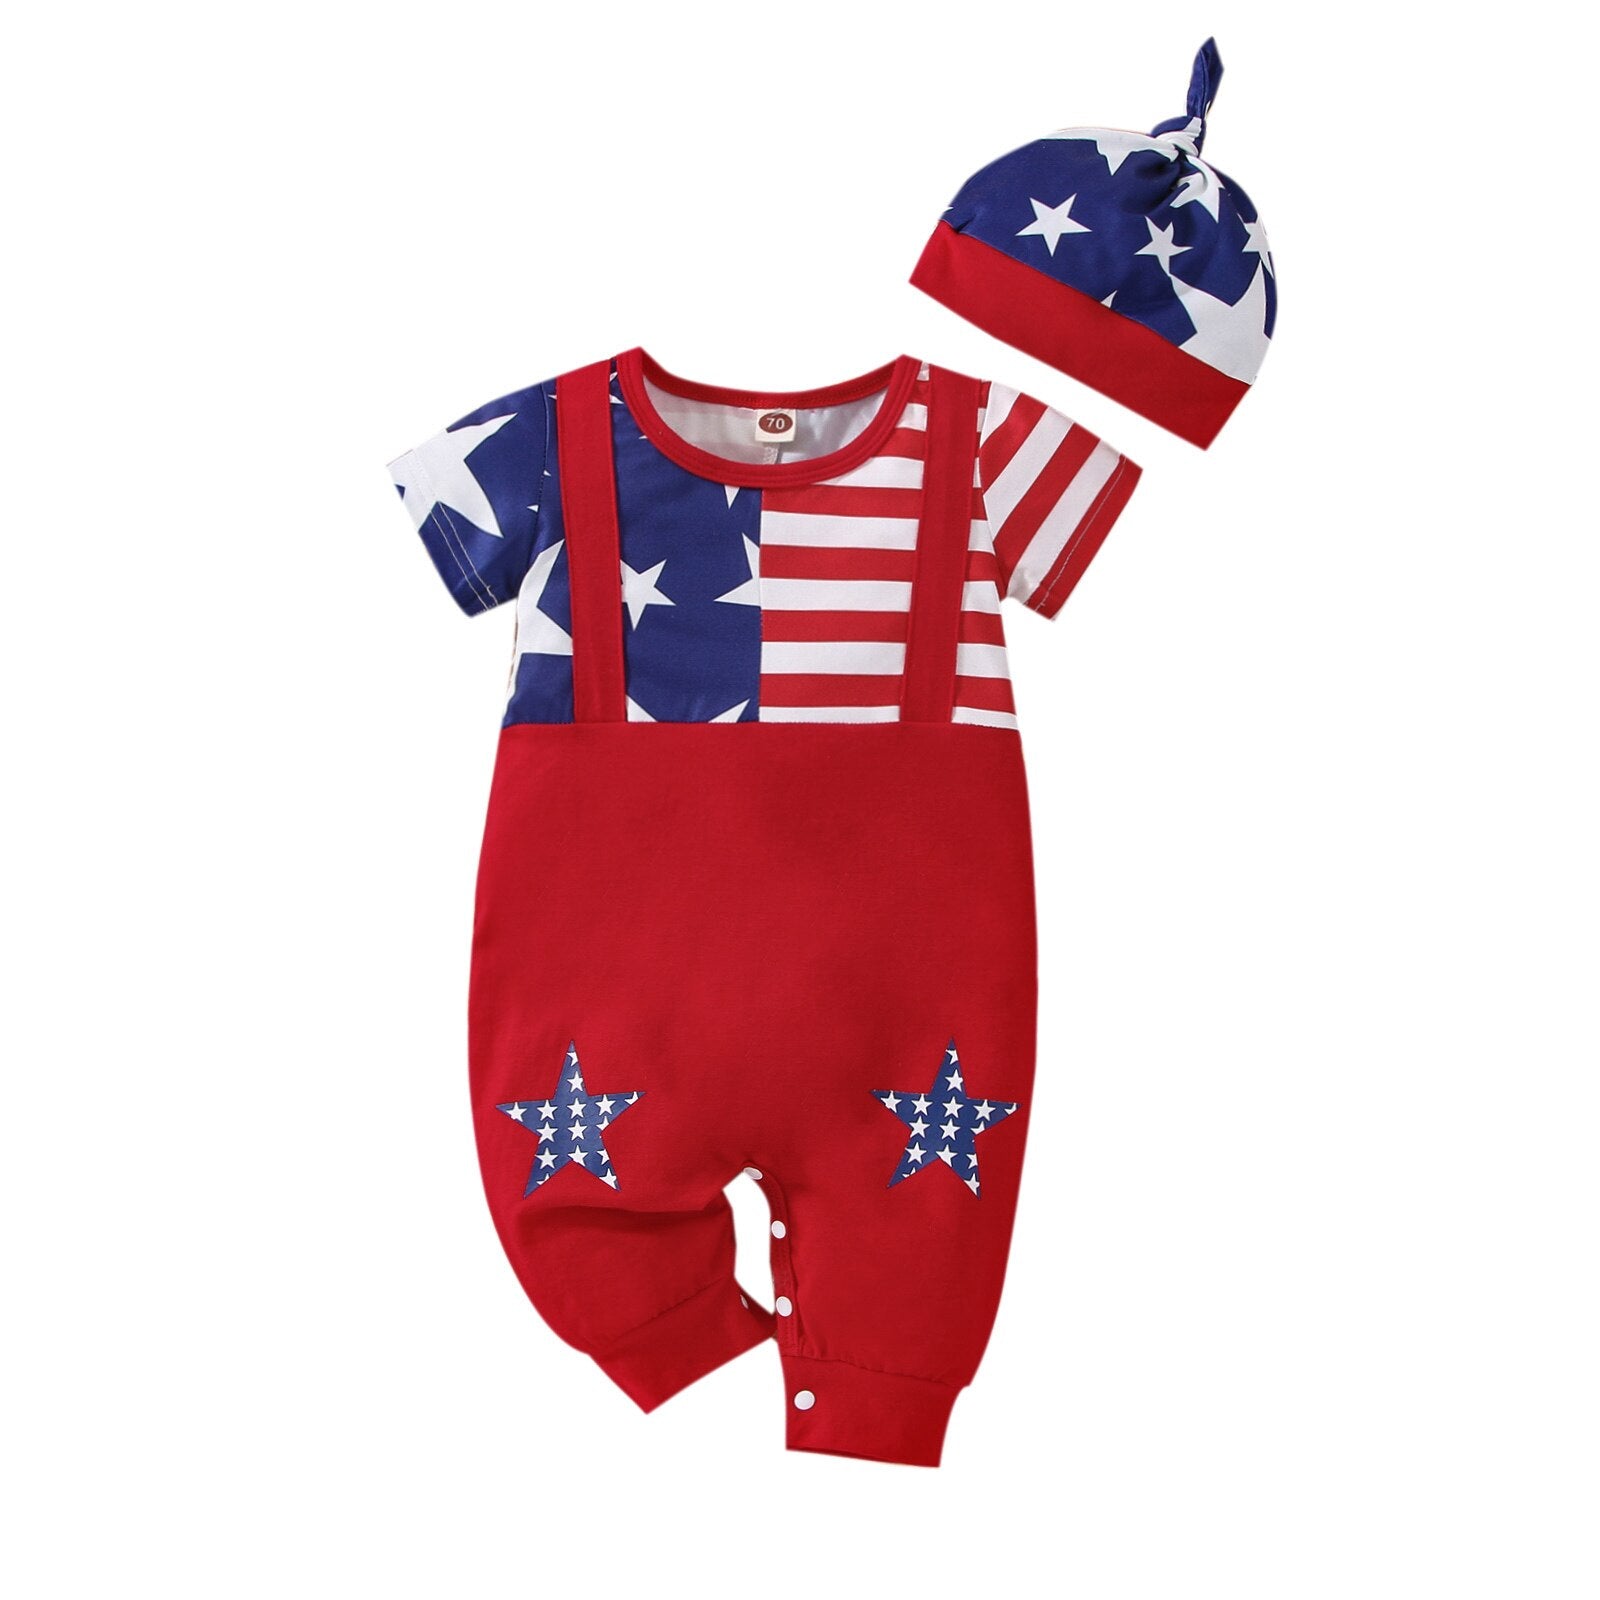 Summer Independence Day Baby Romper with Star and Stripe Print